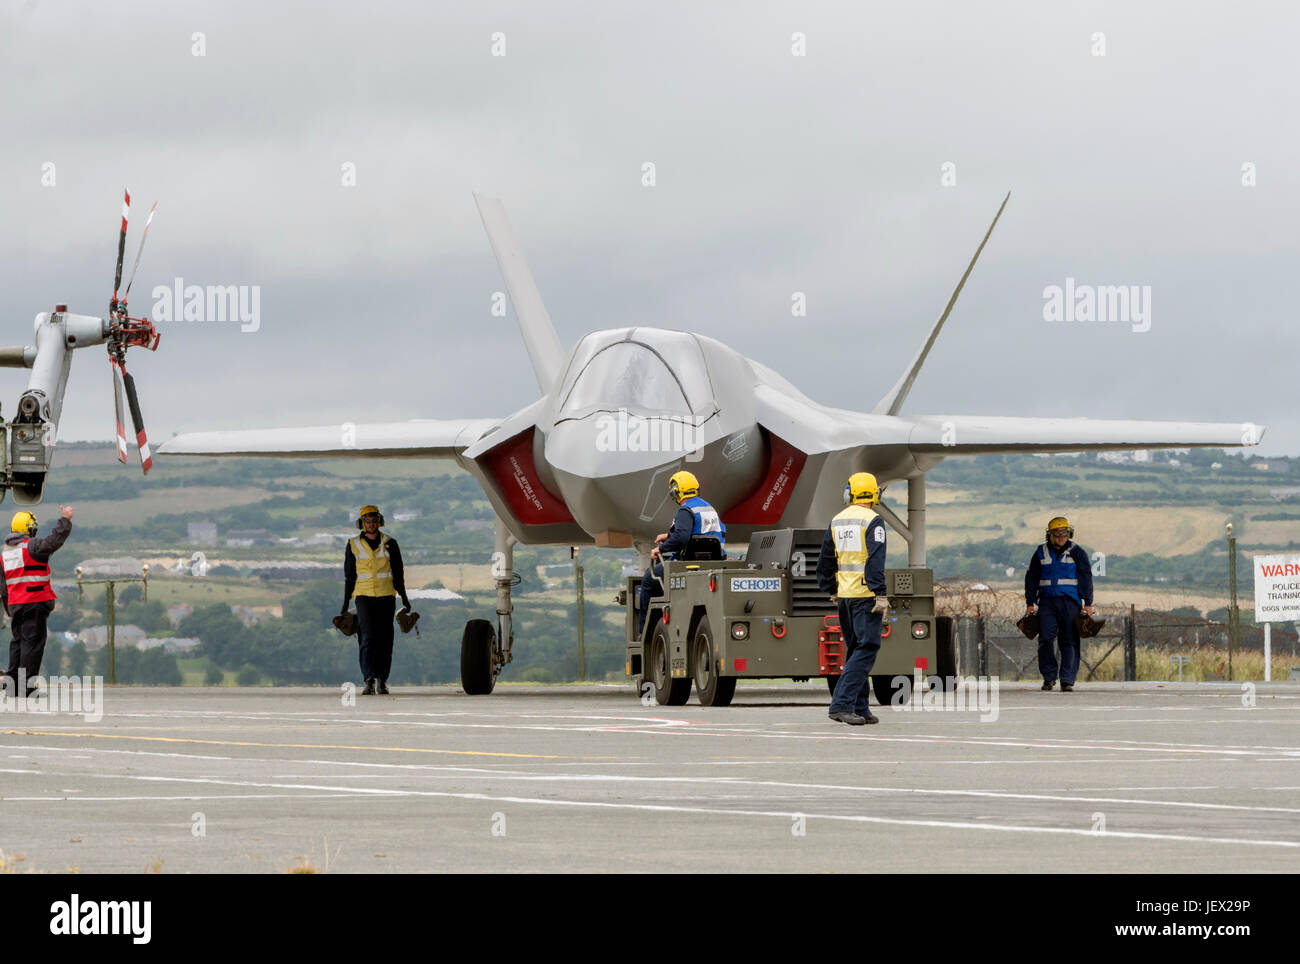 Official Media Assignment at RNAS Culdrose, Helston, Cornwall, UK. 27th June, 2017. Life-size replicas of the Royal Navy F-35B Lightning II jets, during aircraft movements at RNAS Culdrose Dummy Deck facility. These aircraft are used to replicate real F35B aircraft to provide training aids for Royal Navy Aircraft Handlers training to join HMS Queen Elizabeth Credit: Bob Sharples/Alamy Live News Stock Photo